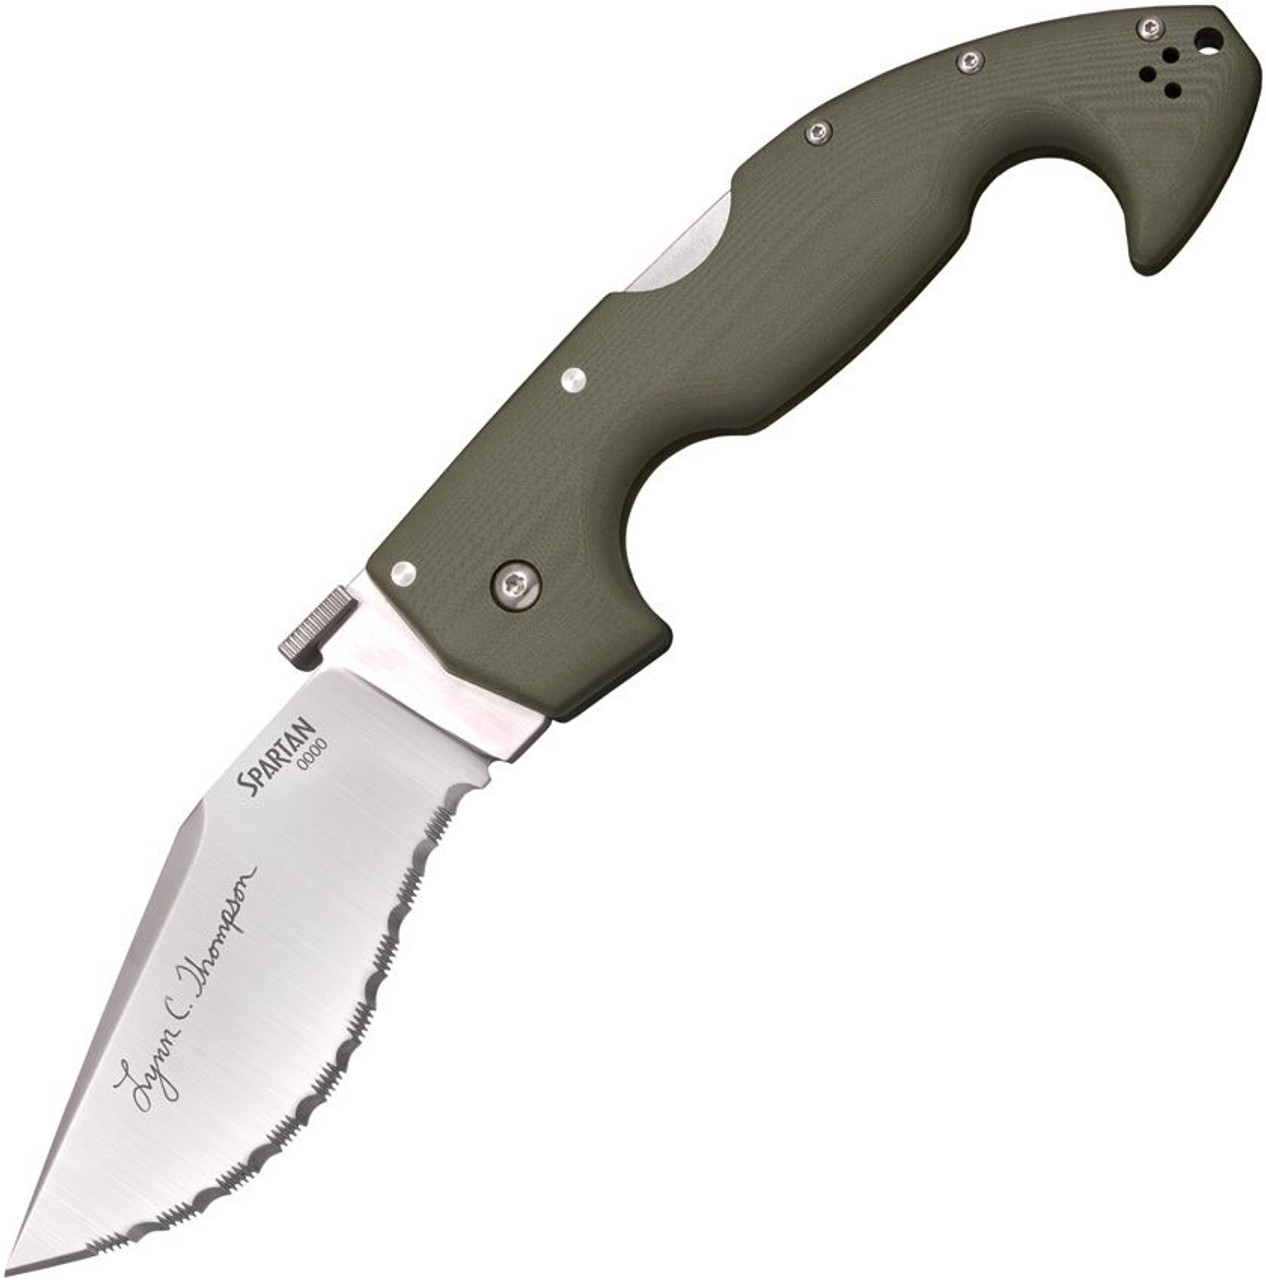 Cold Steel Spartan Lockback. S35VN stainless clip point blade.